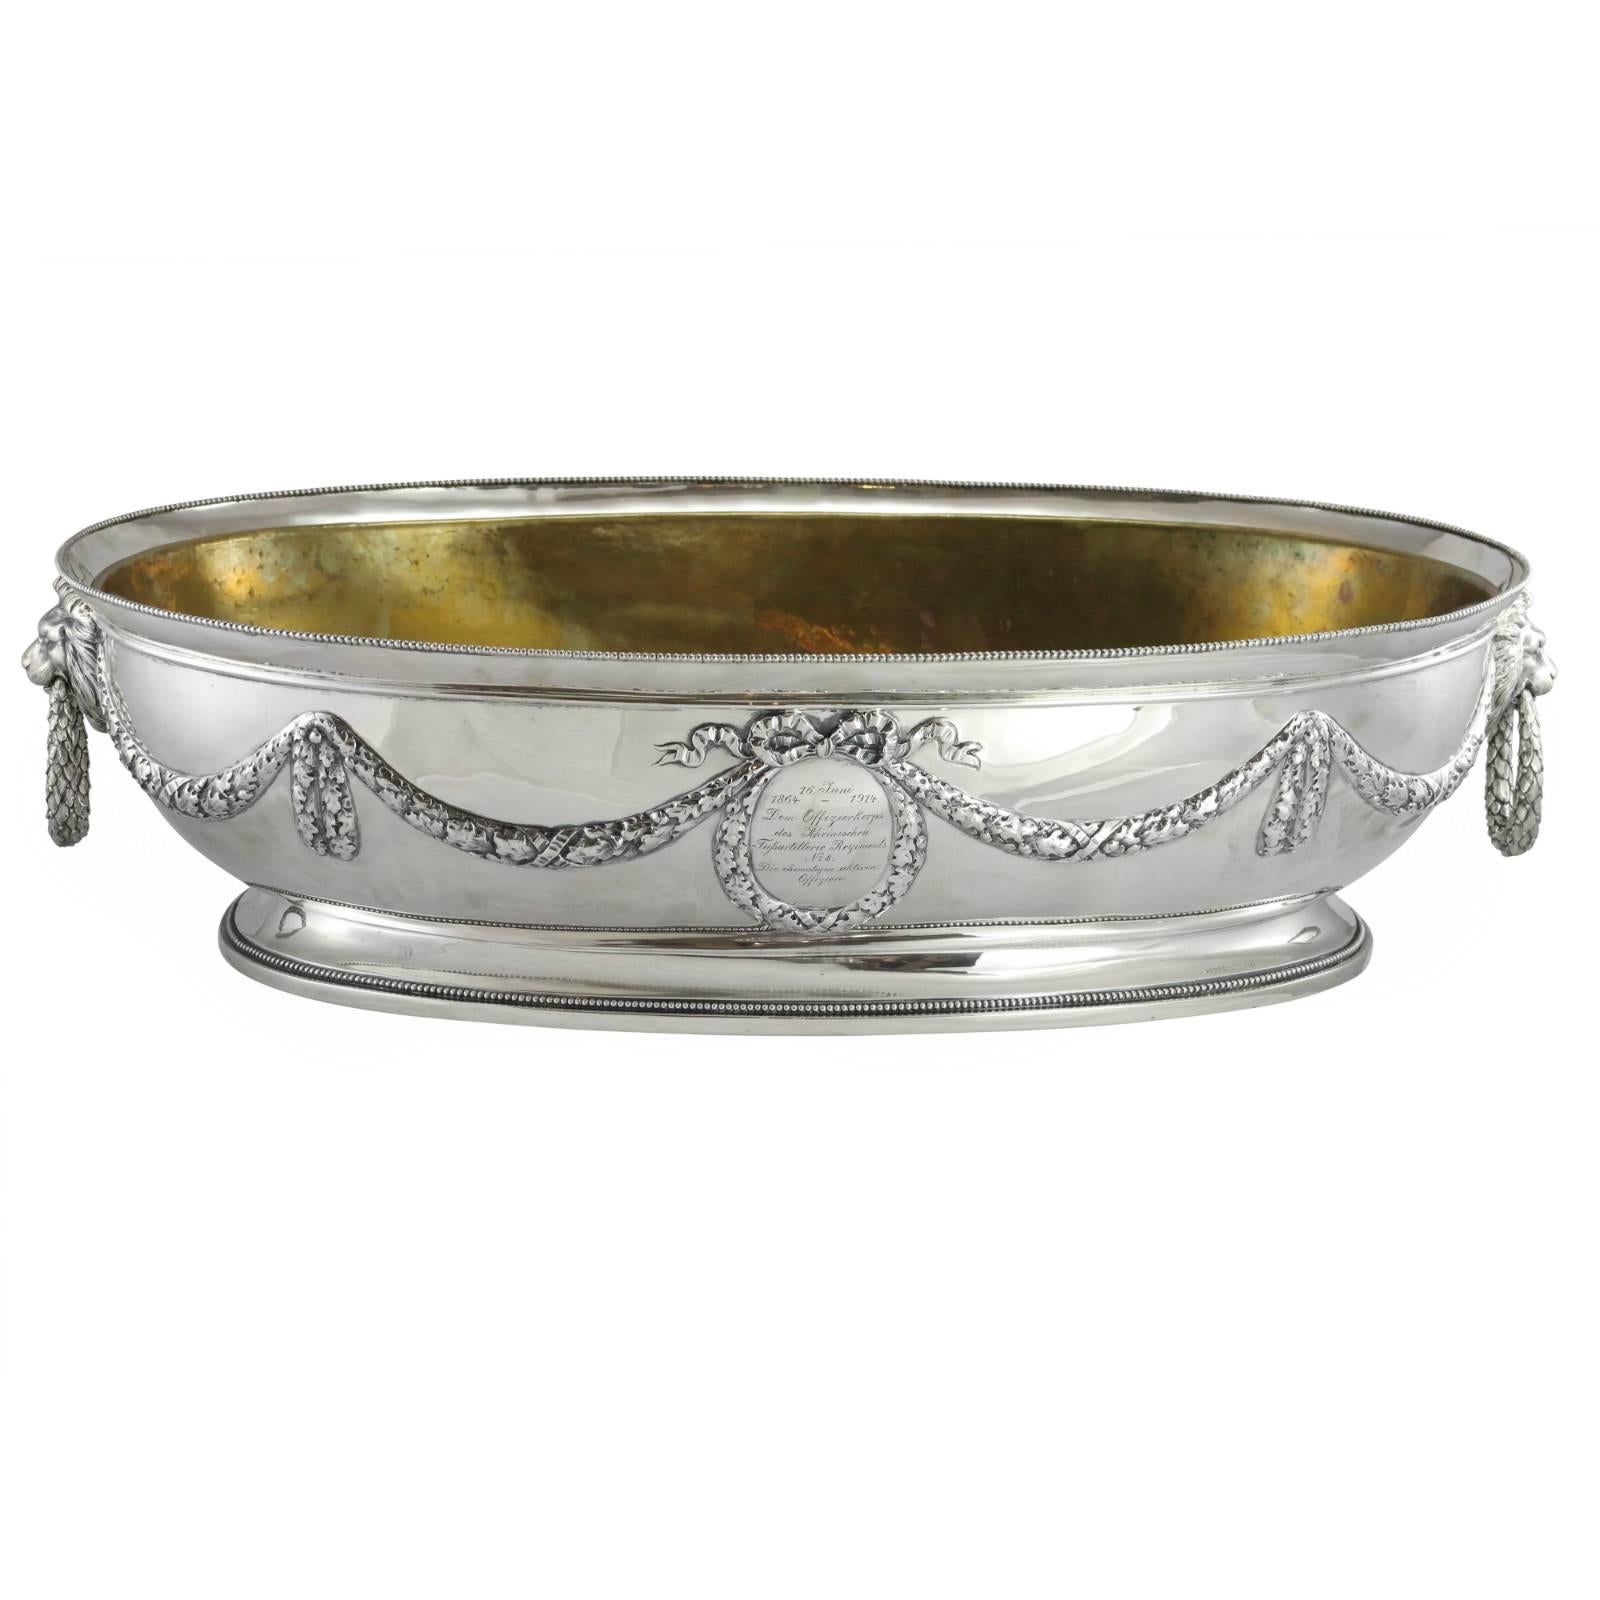 Early 20th Century German Continental Silver Presentation Wine Cooler For Sale 1